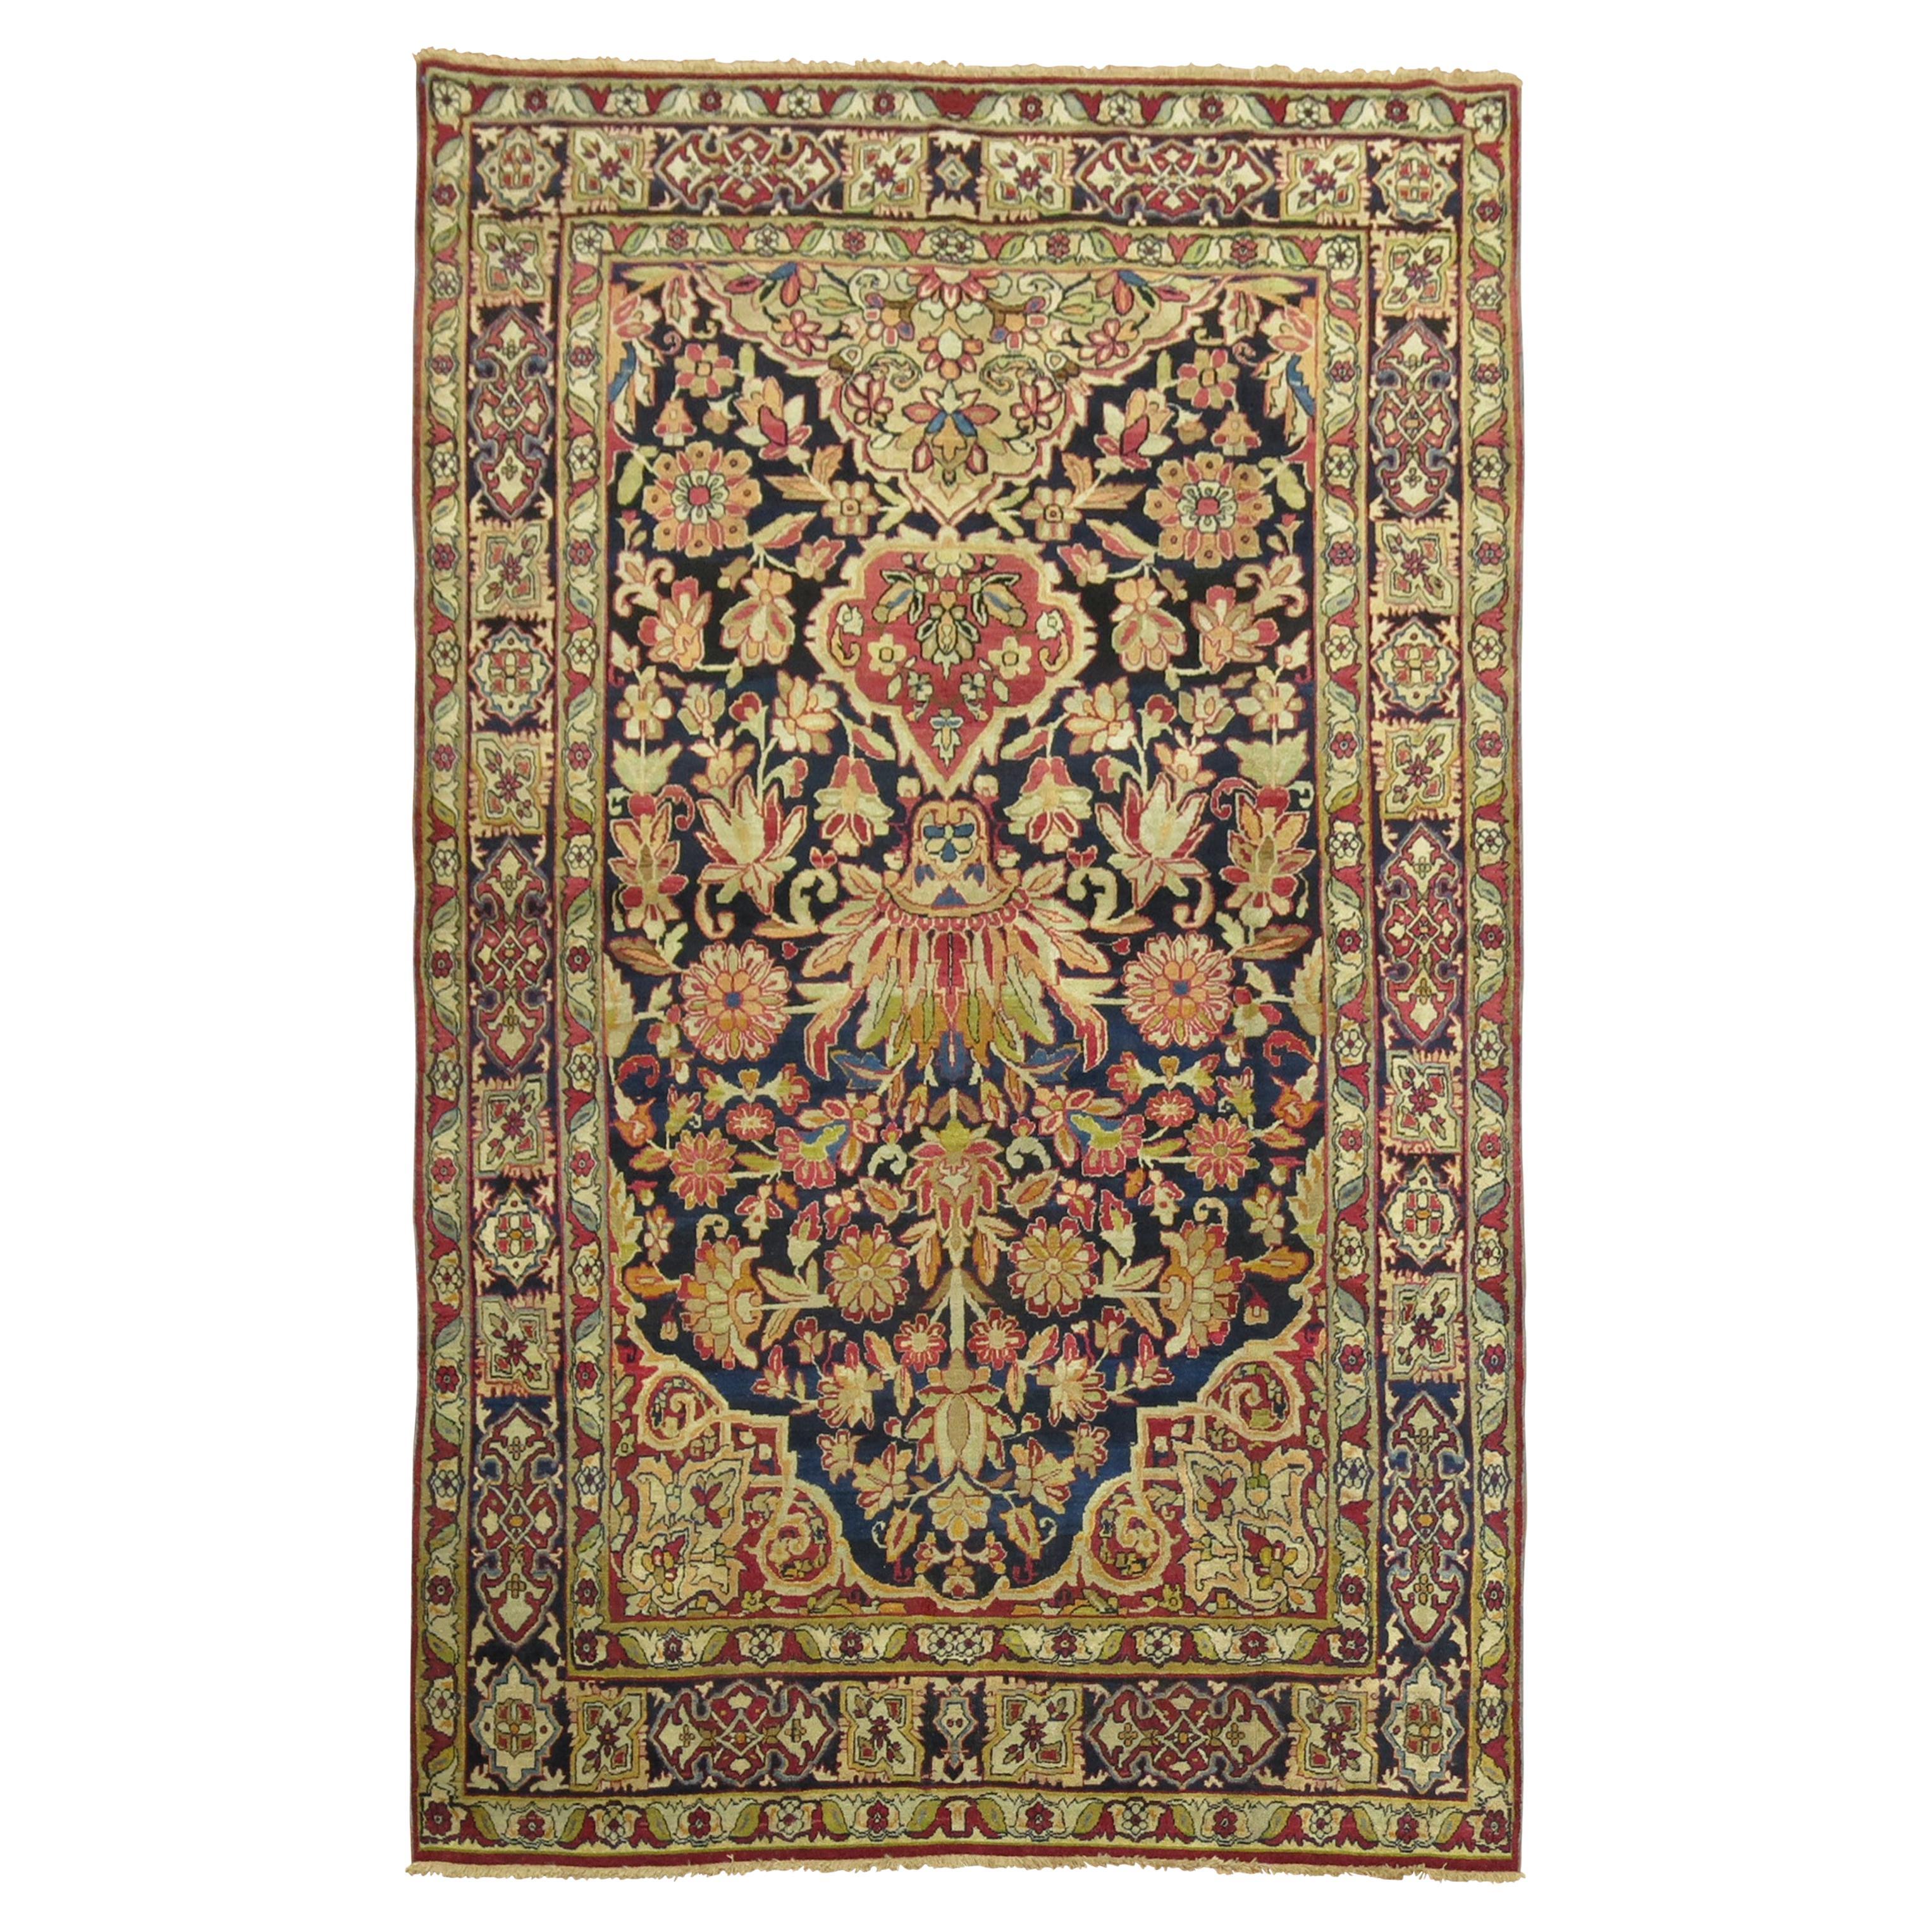 A late 19th century Persian Lavar Kerman rug

4'1'' x 6'8''

The province and city of Kerman in Central Persia continued to make extraordinary carpets throughout the 19th century and turn of the 20th century. Satellite workshops were set up in